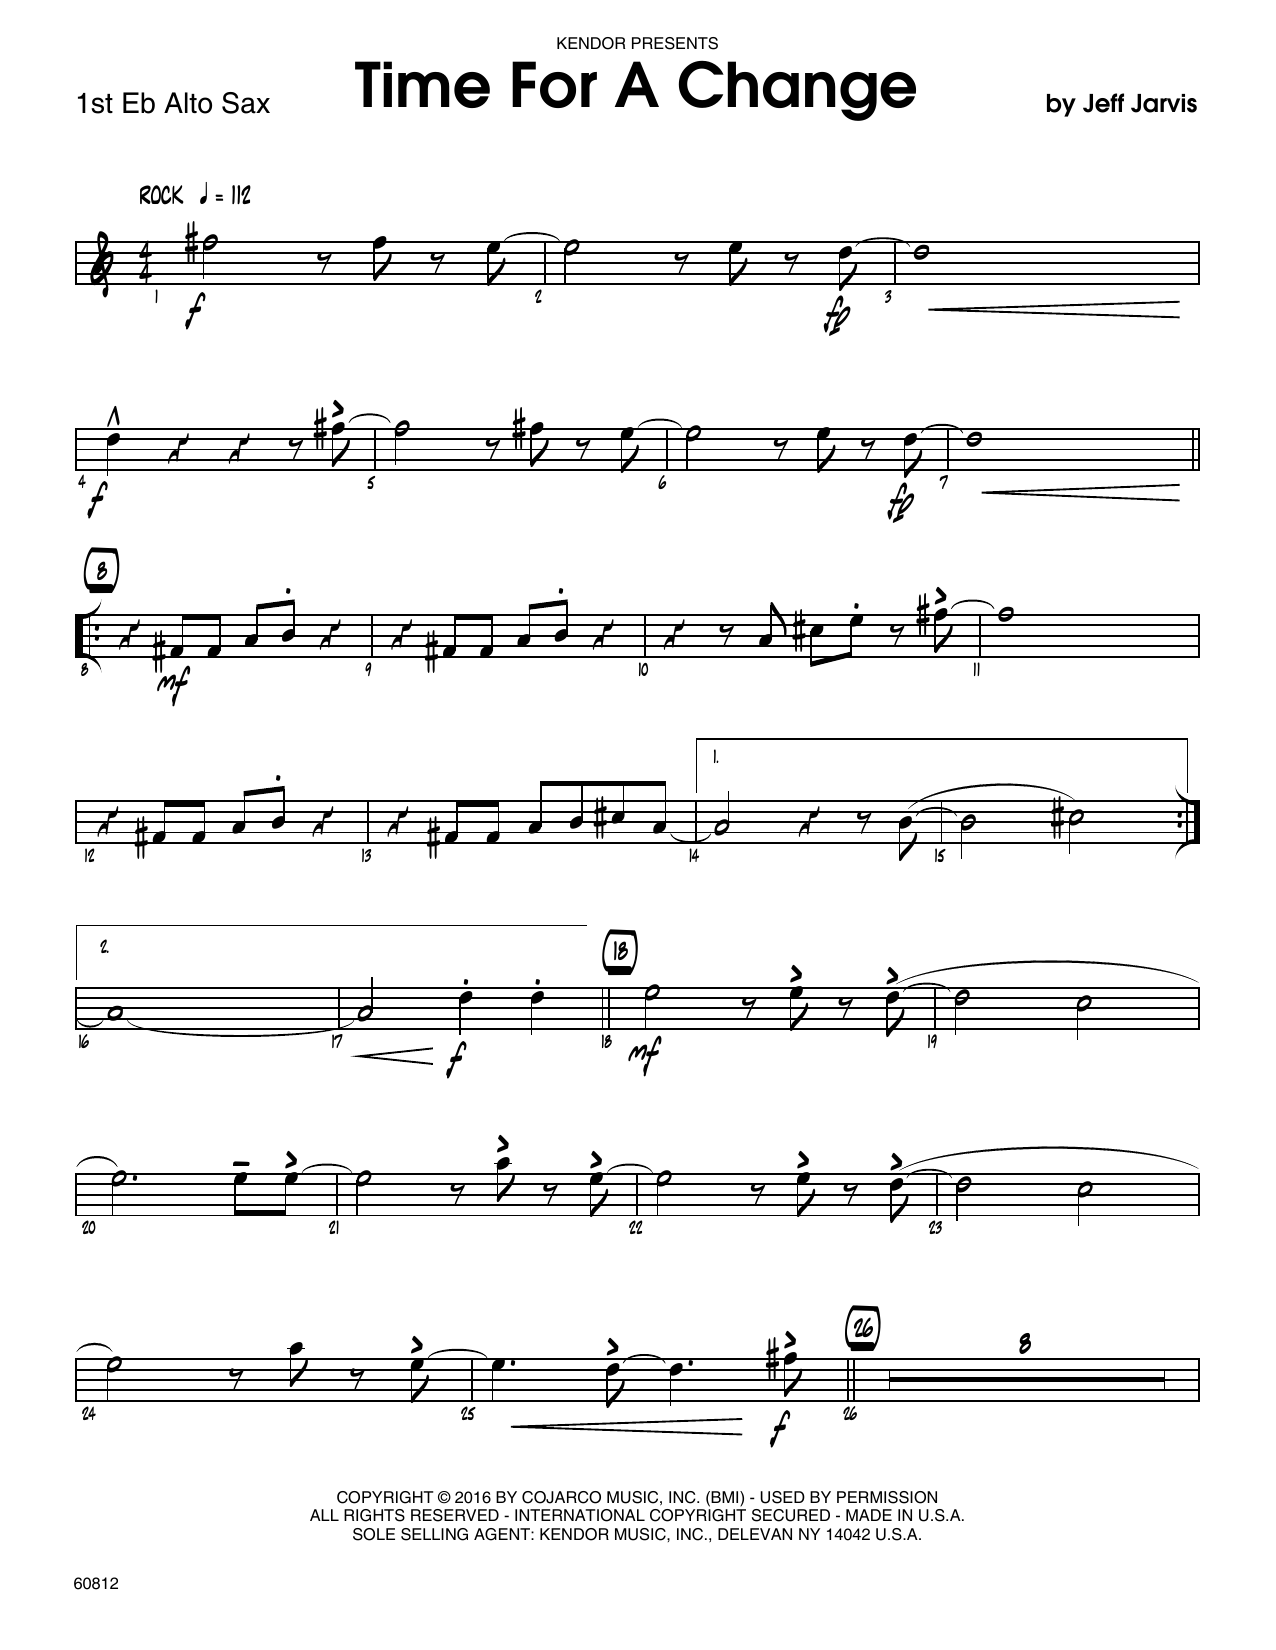 Download Jeff Jarvis Time For A Change - 1st Eb Alto Saxopho Sheet Music